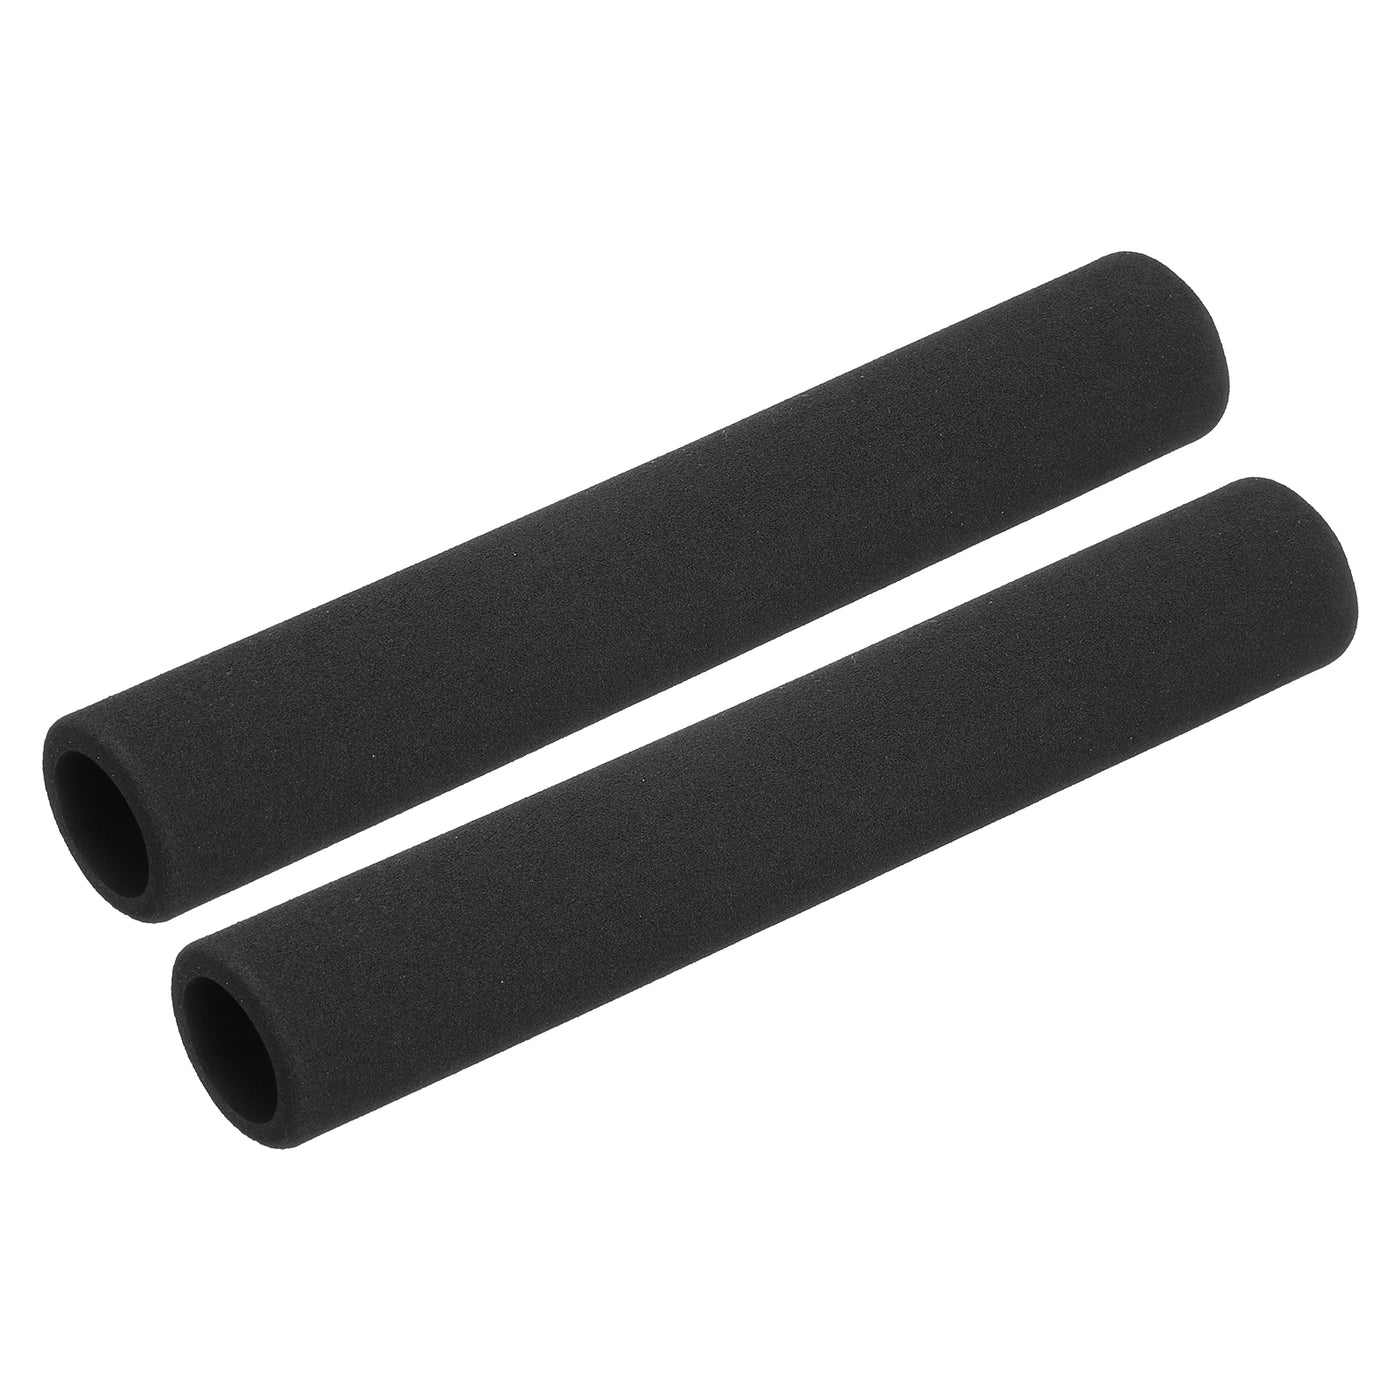 uxcell Uxcell Pipe Insulation Tube Foam Tubing for Handle Grip Support 22mm ID 32mm OD 200mm Heat Preservation Black 2pcs